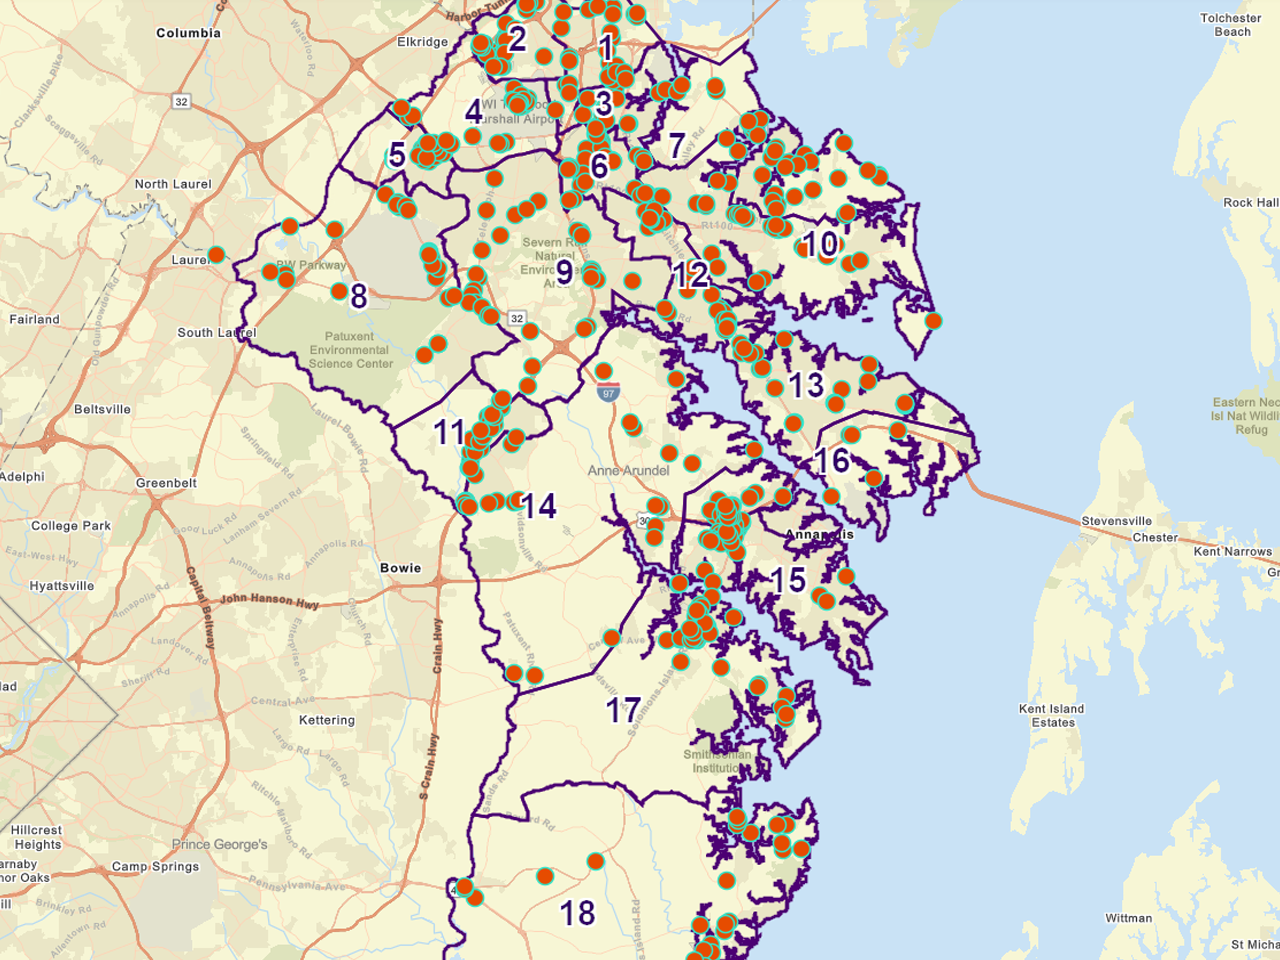 Current Liquor Licenses in Anne Arundel County